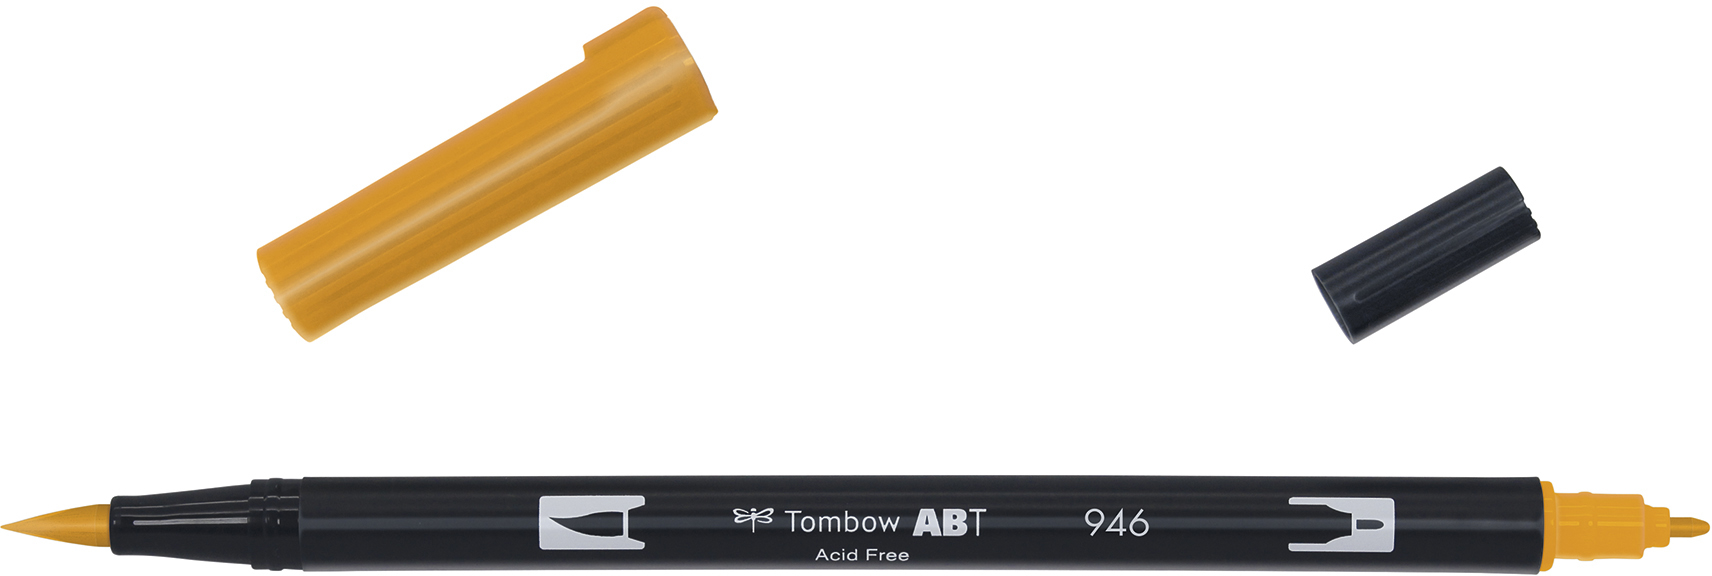 TOMBOW Dual Brush Pen ABT 946 ocre or ocre or